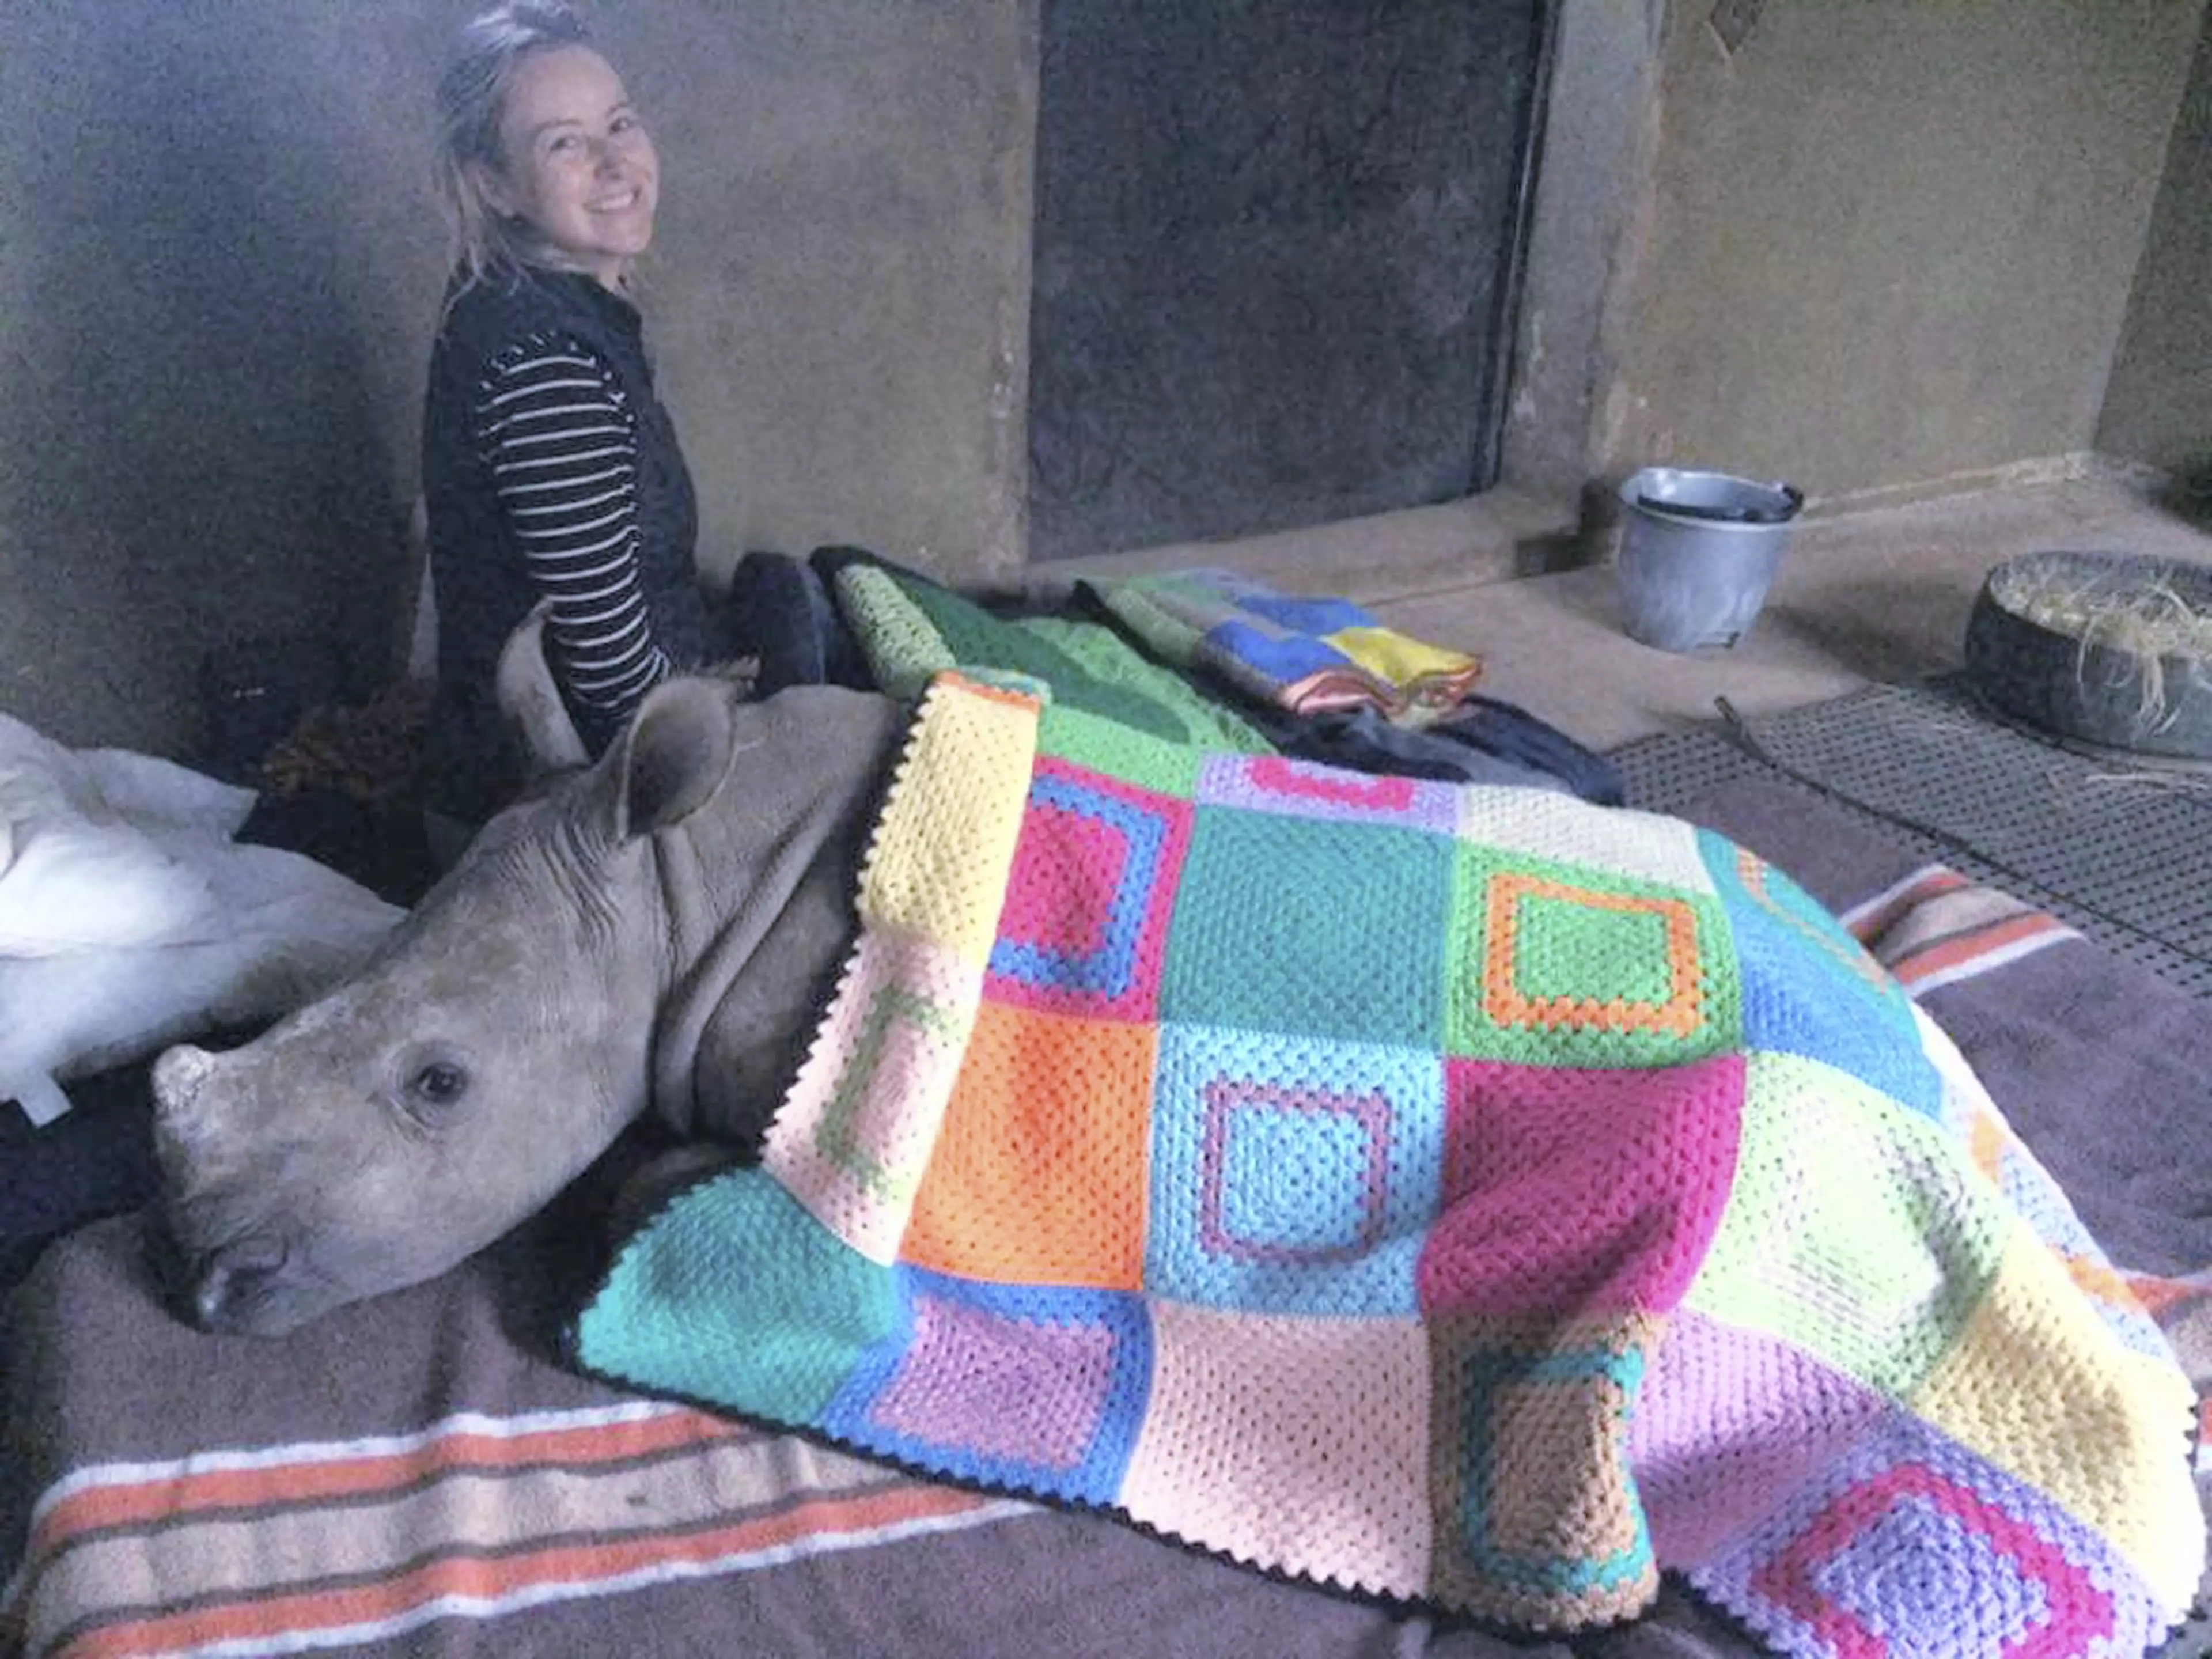 Blankets for Baby Rhinos was started by Elisa Best who say they have been overwhelmed with donations (